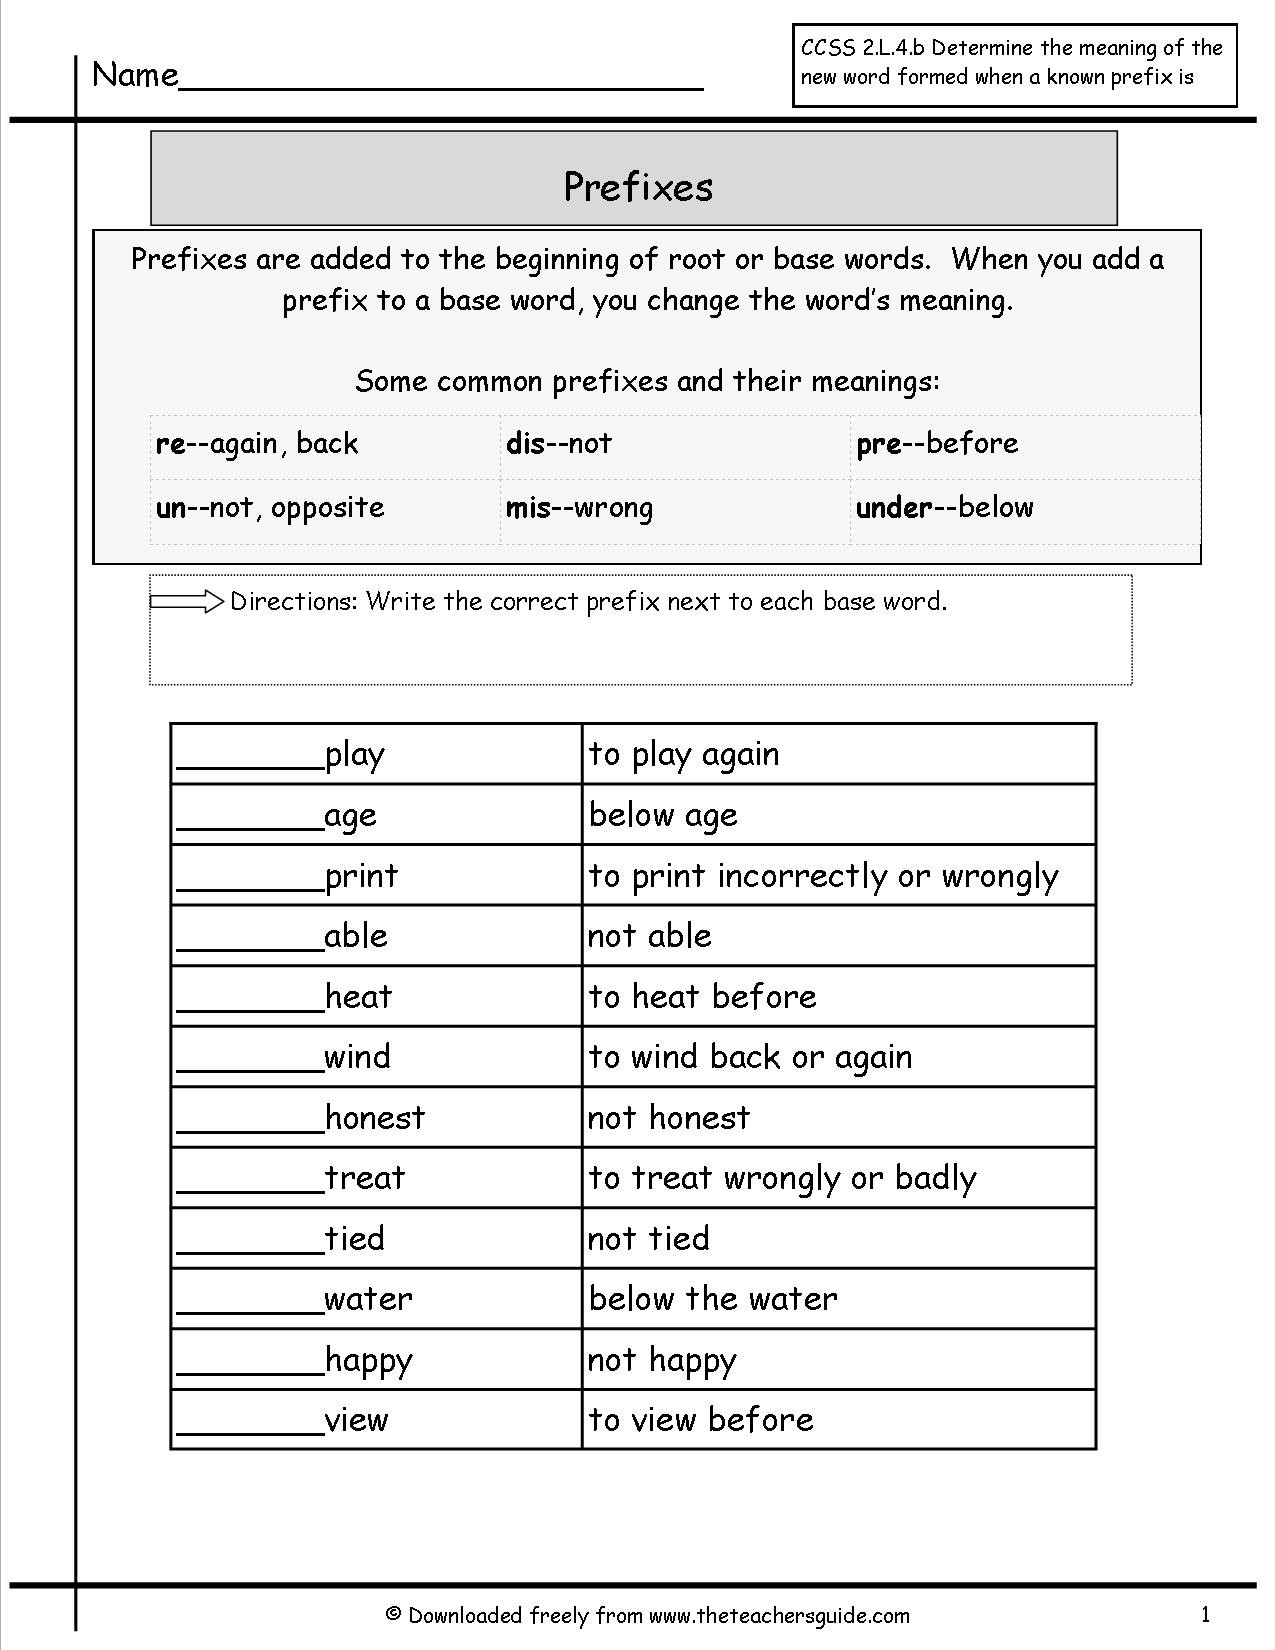 Suffix Worksheets 4th Grade Free Prefixes and Suffixes Worksheets From the Teacher S Guide